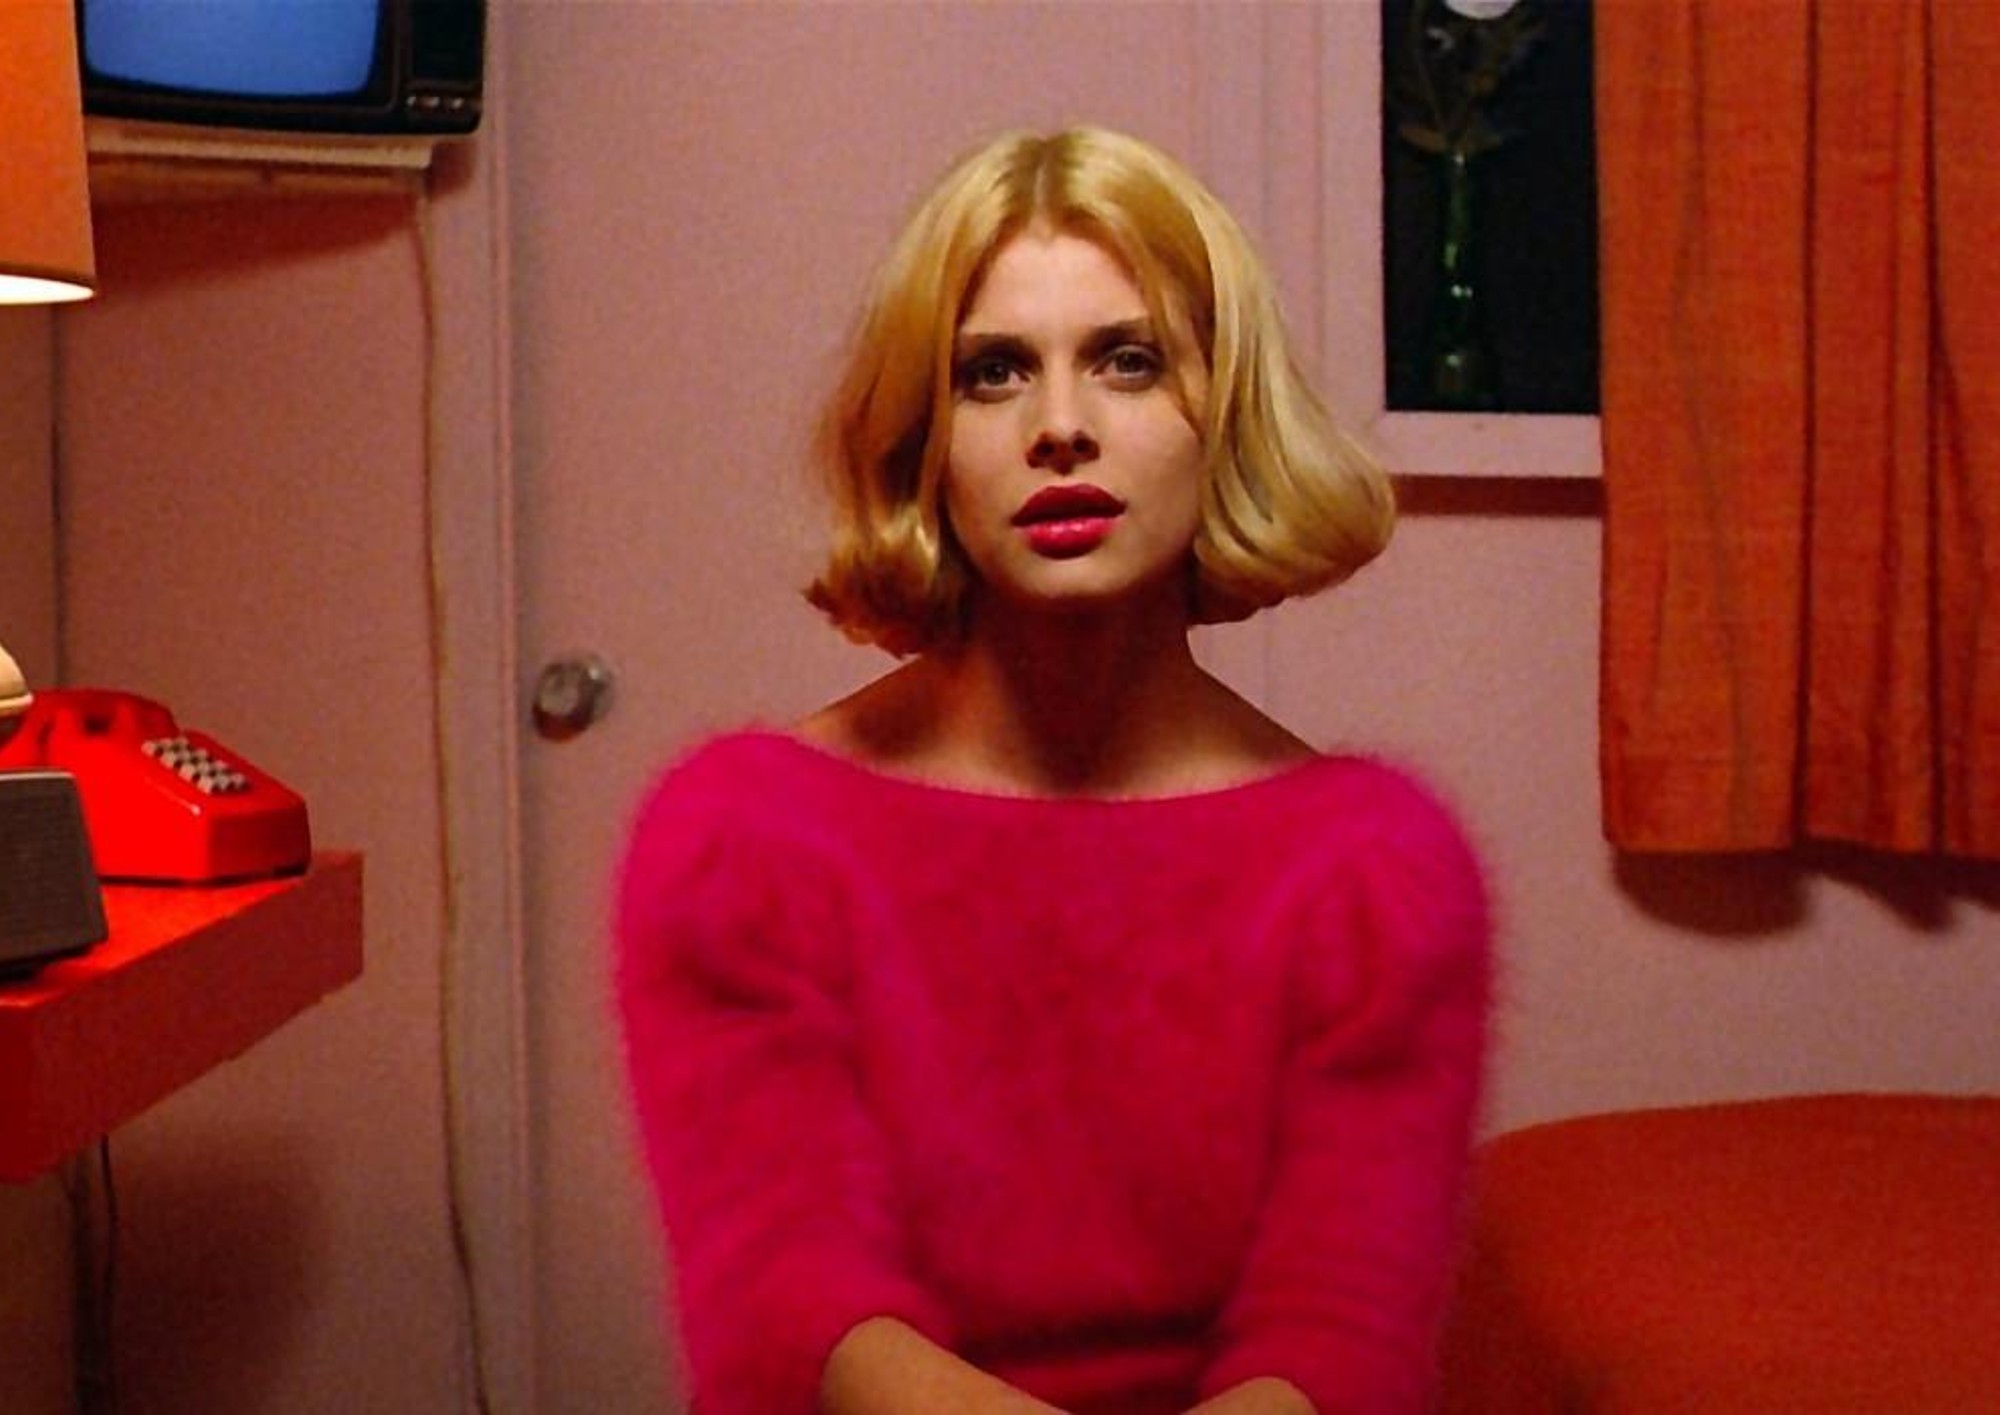 Image from the motion picture Paris, Texas